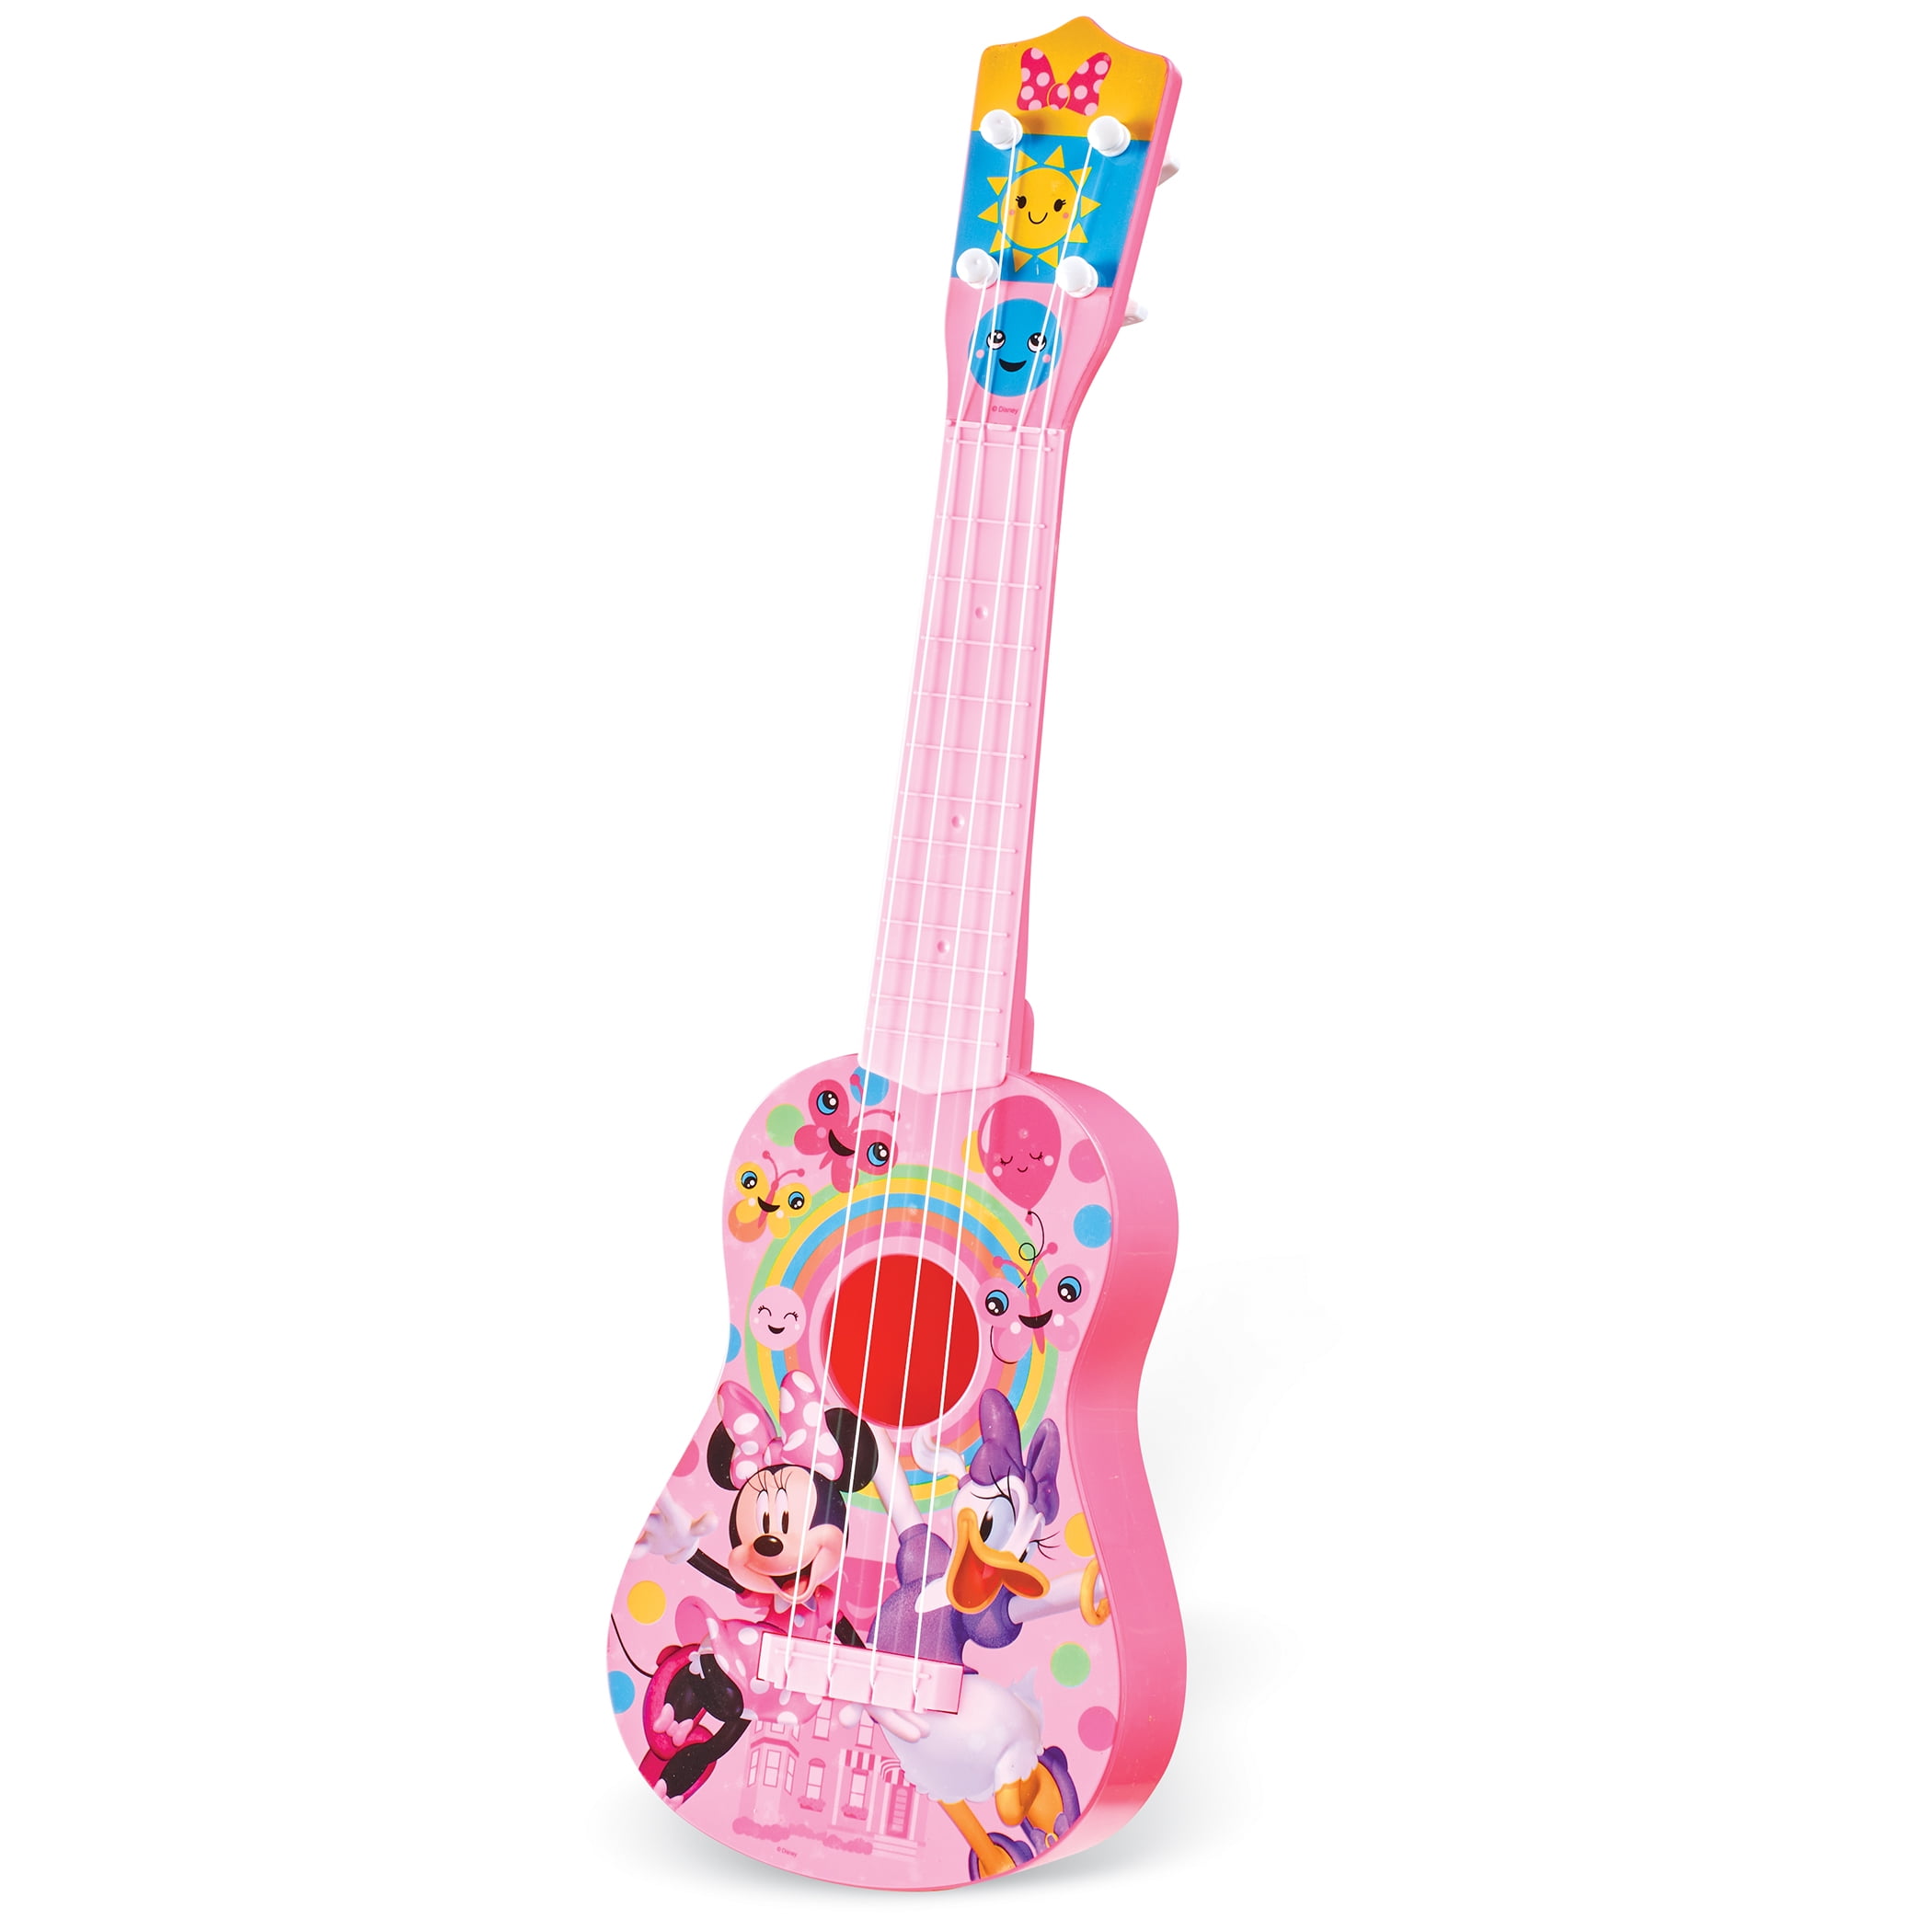 First Act Disney Minnie Mouse Multicolor 4 String Plastic Ukulele mini Guitar 